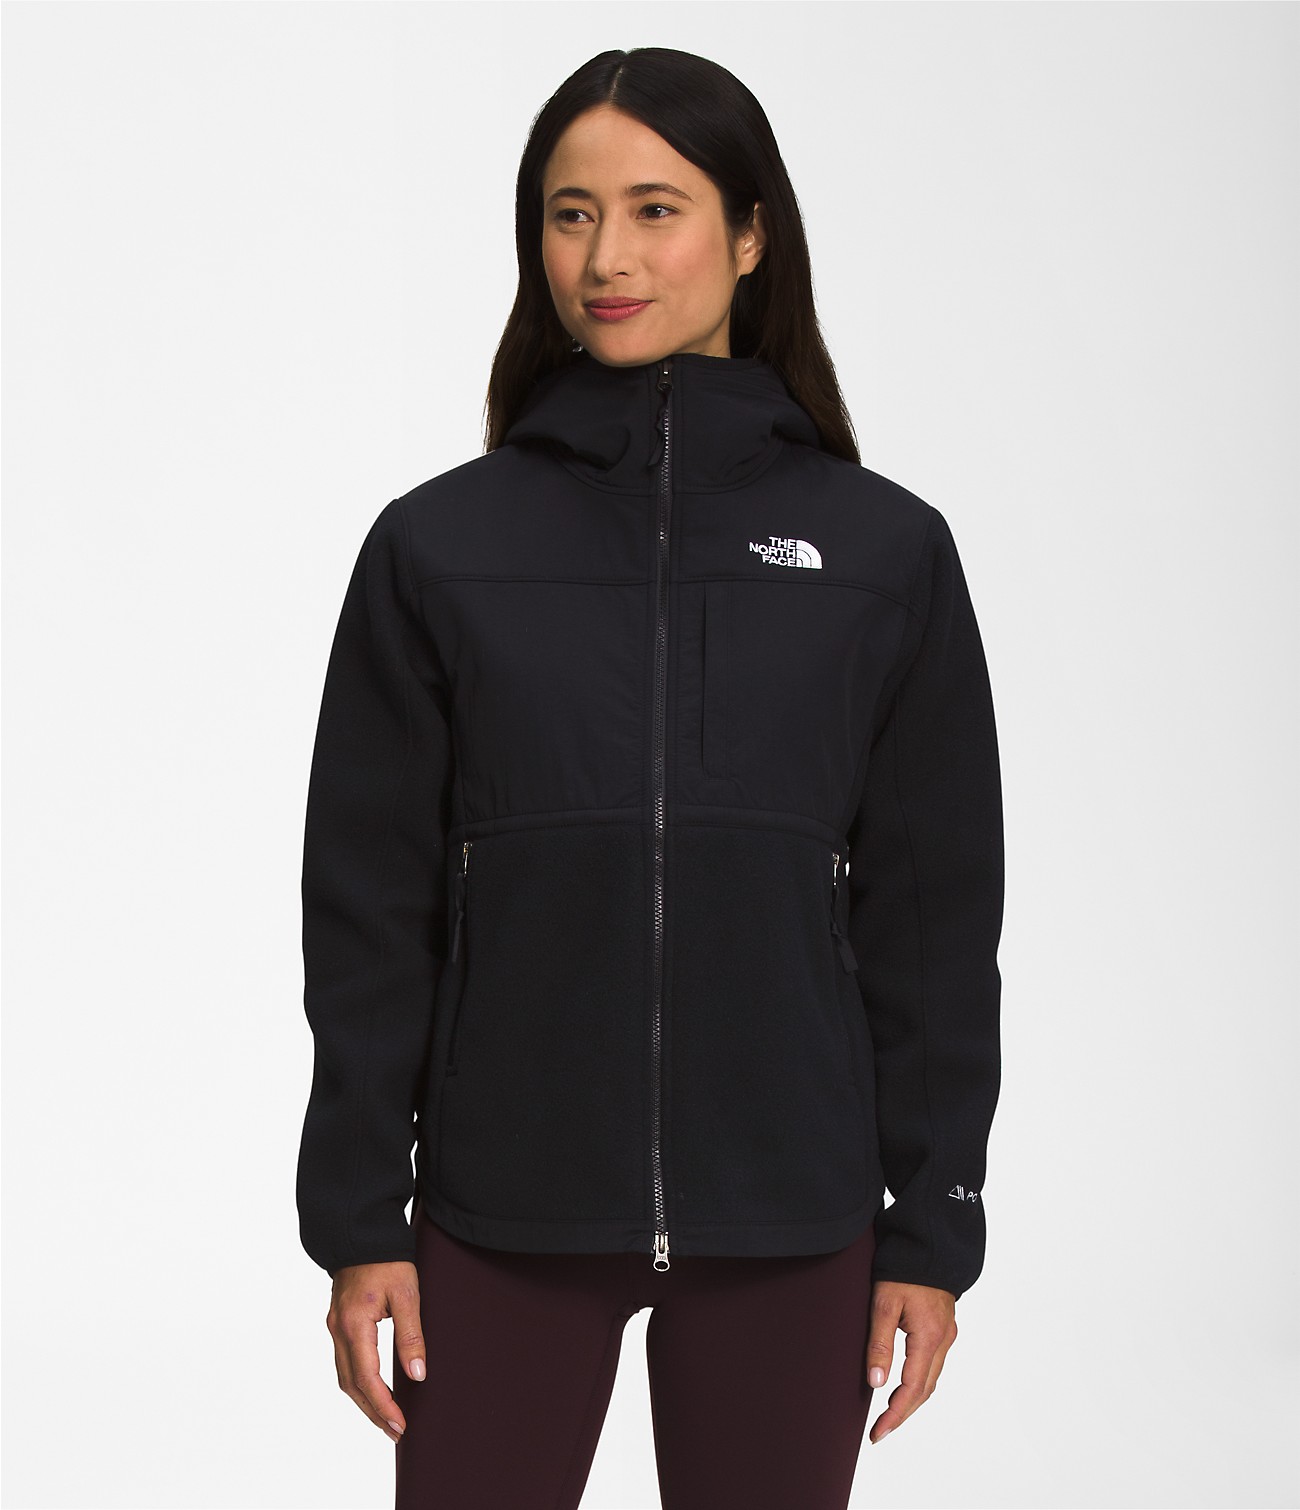 Unlock Wilderness' choice in the Woolrich Vs North Face comparison, the Denali Hoodie by The North Face